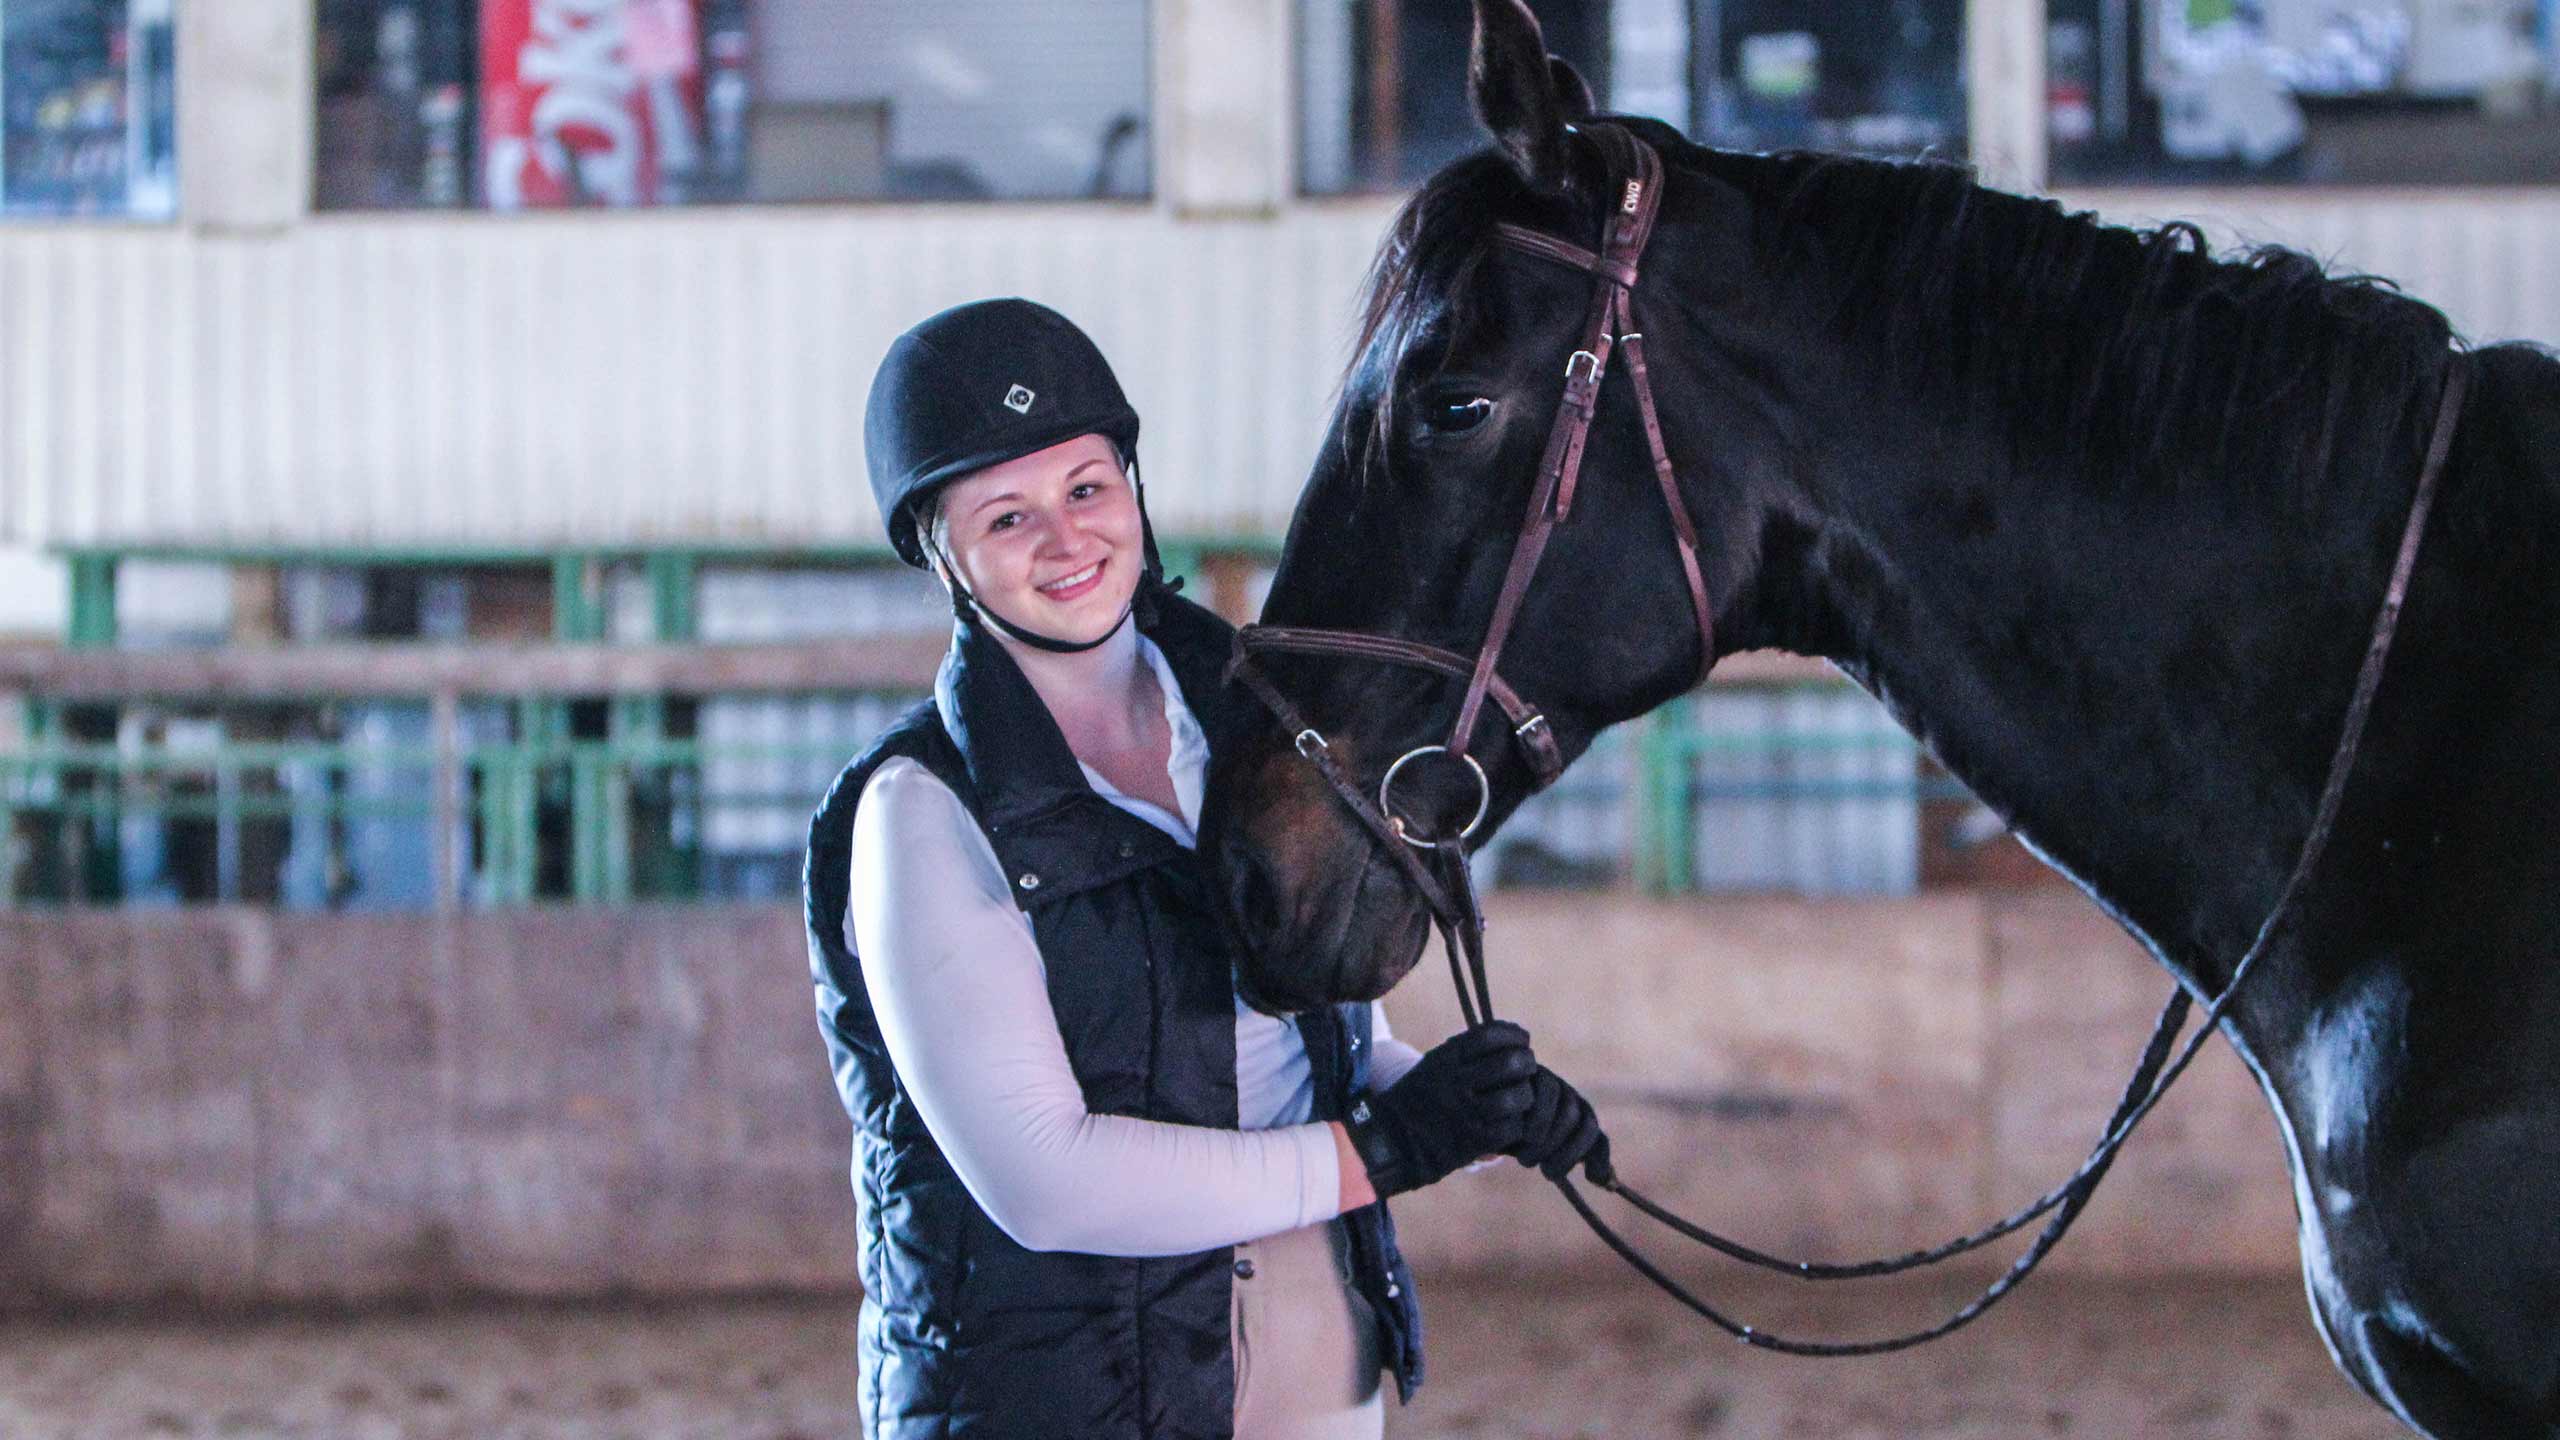 Katie stands next to her horse, Onyx